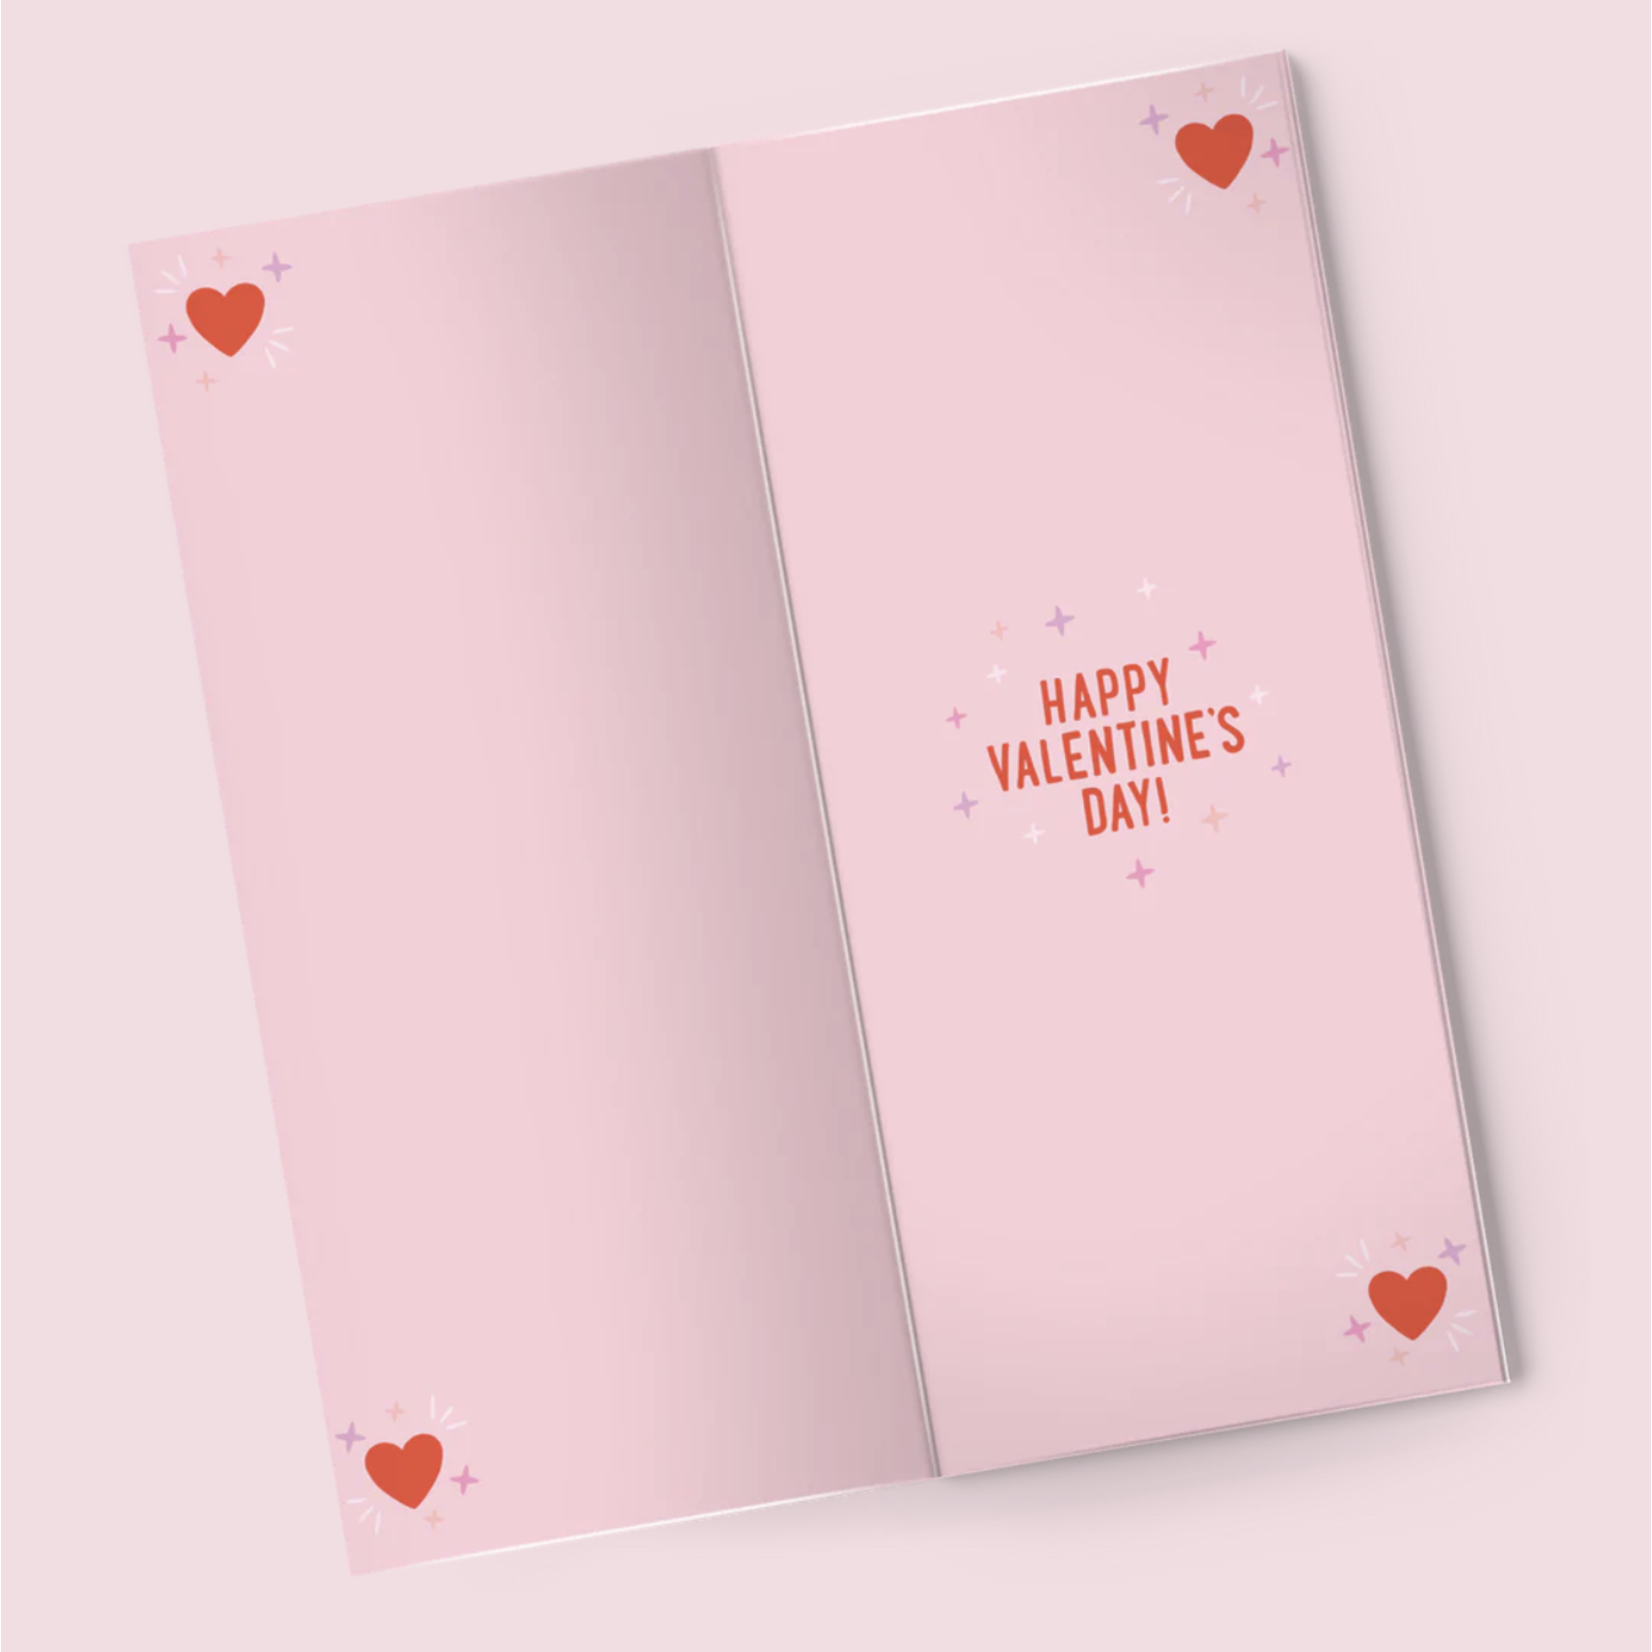 Sweeter Cards Make My Heart Melt Valentine's Day Chocolate Card